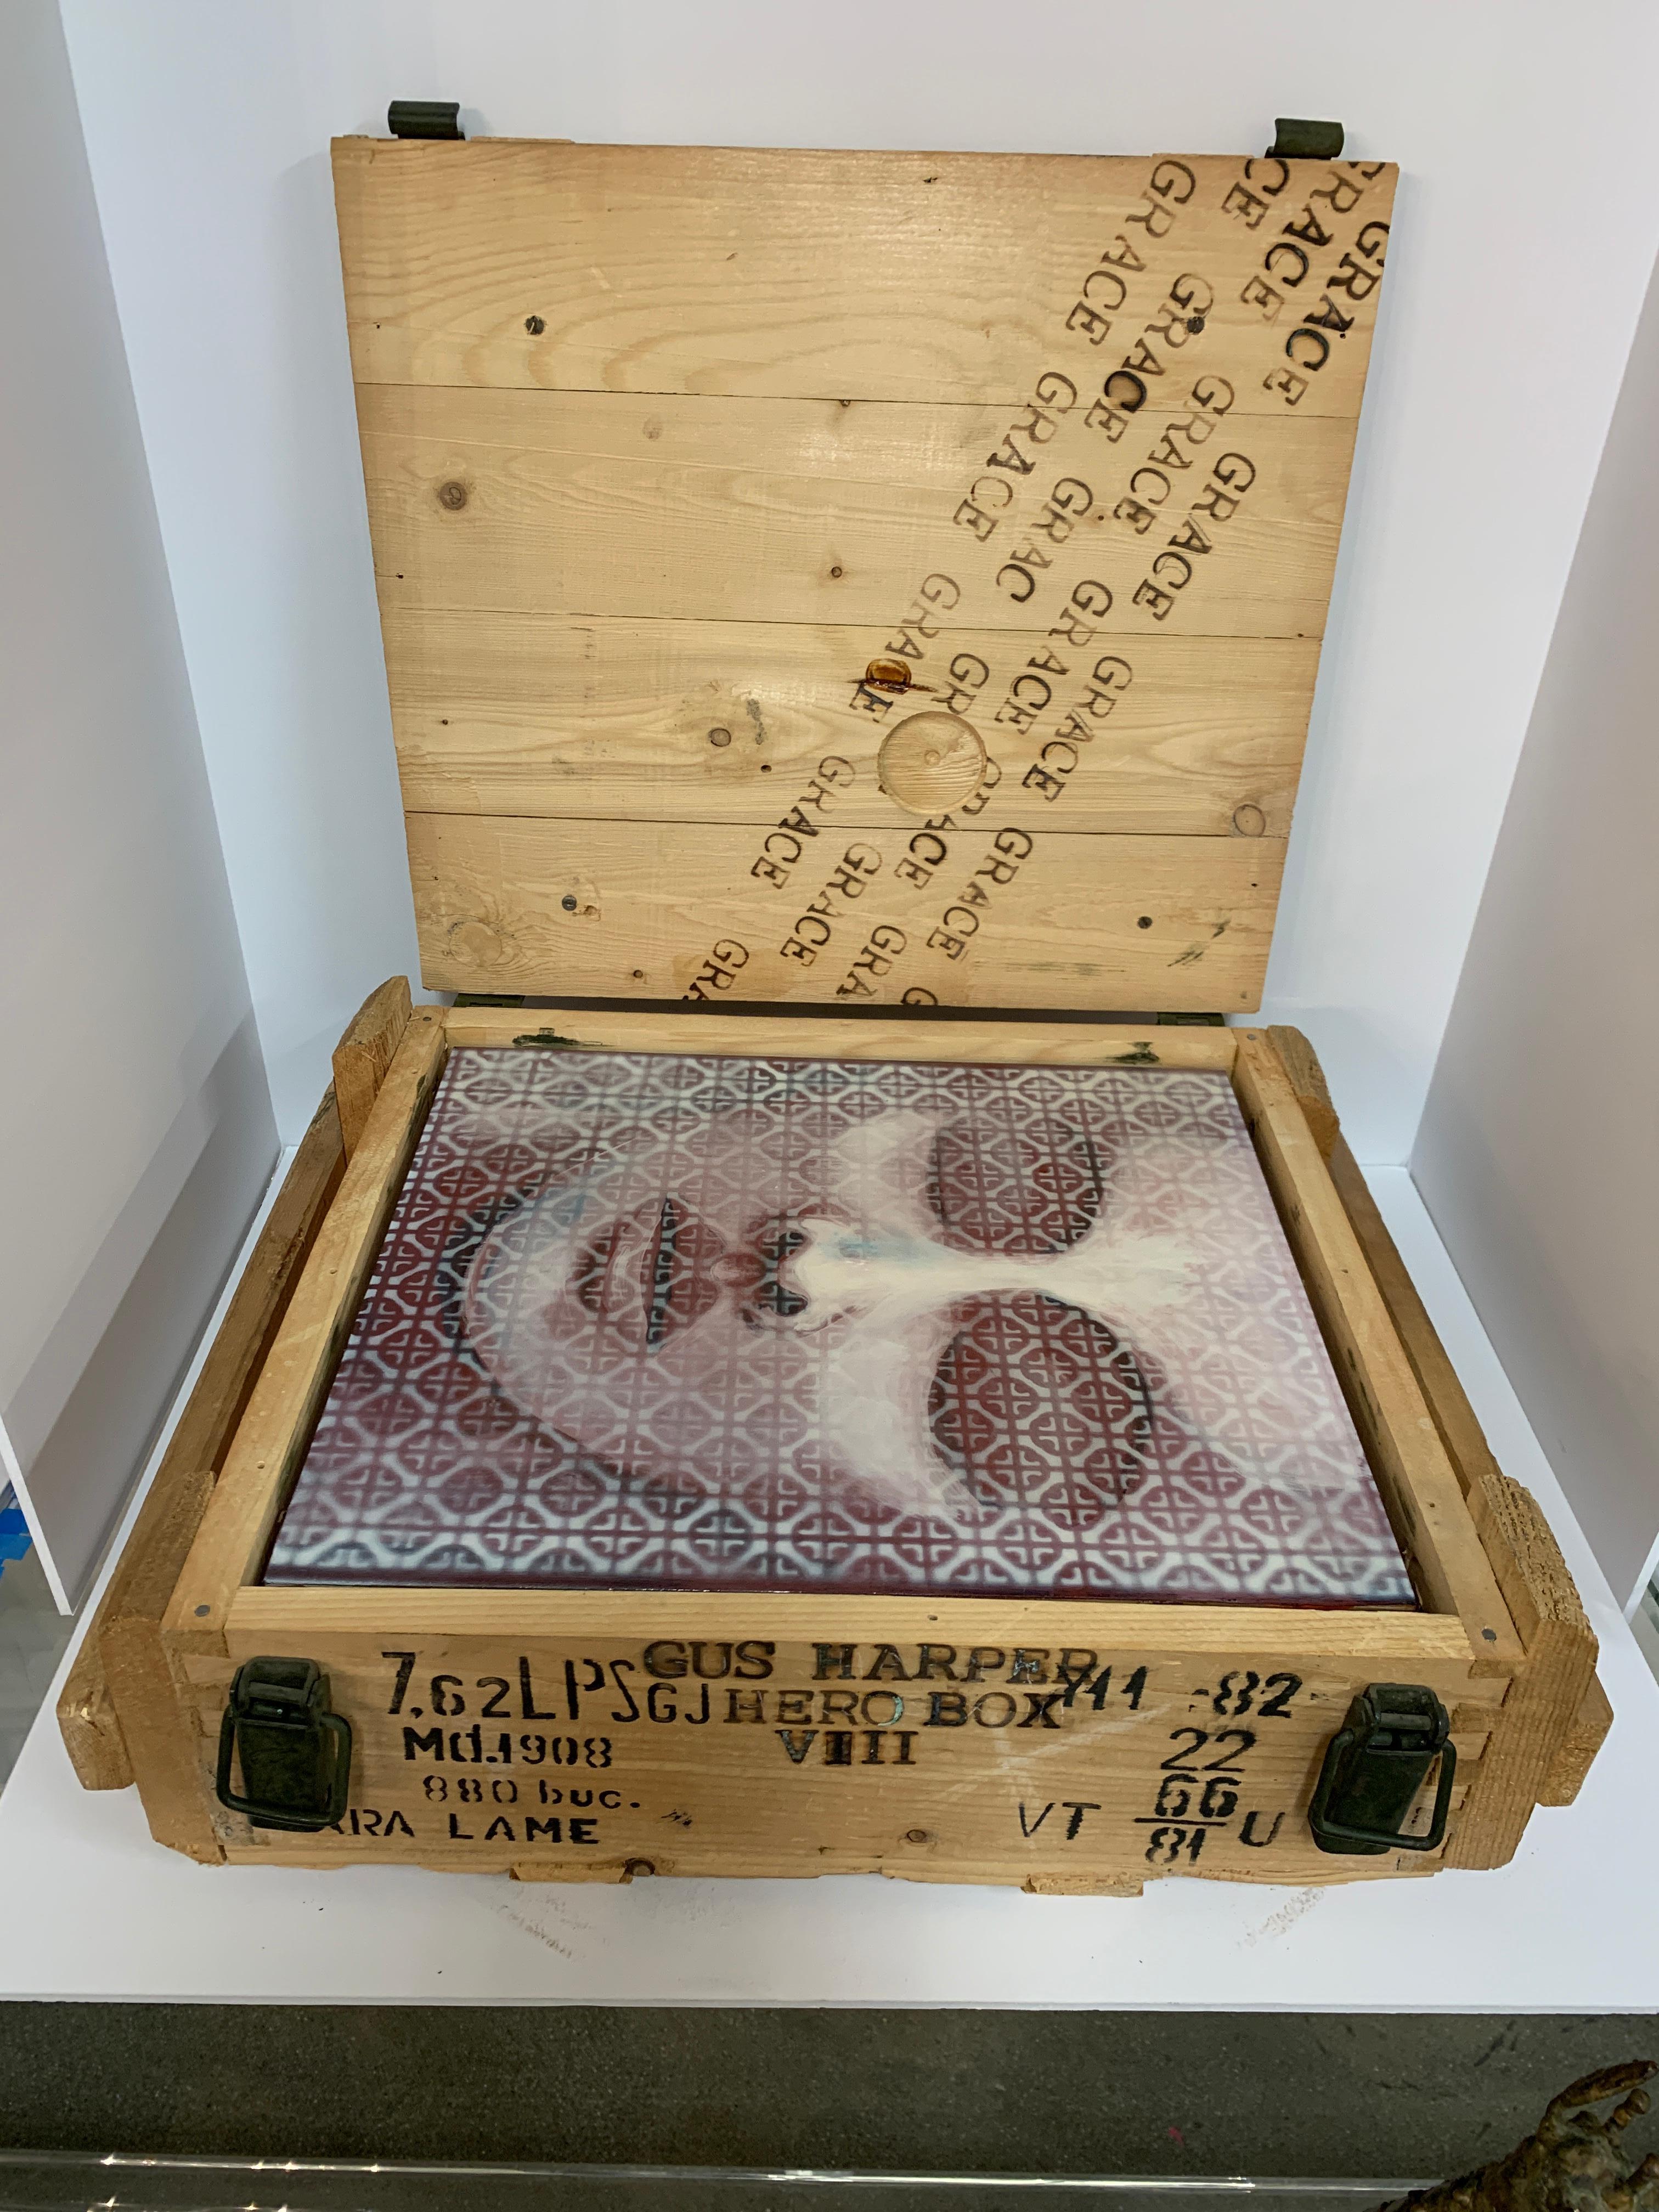 A nice installation package by the noted California artist Gus Harper. This work dates to the early 2000s from a show called fade to white. It is encased in an old wooden ammunition box and features an original work of art. It is burned on the